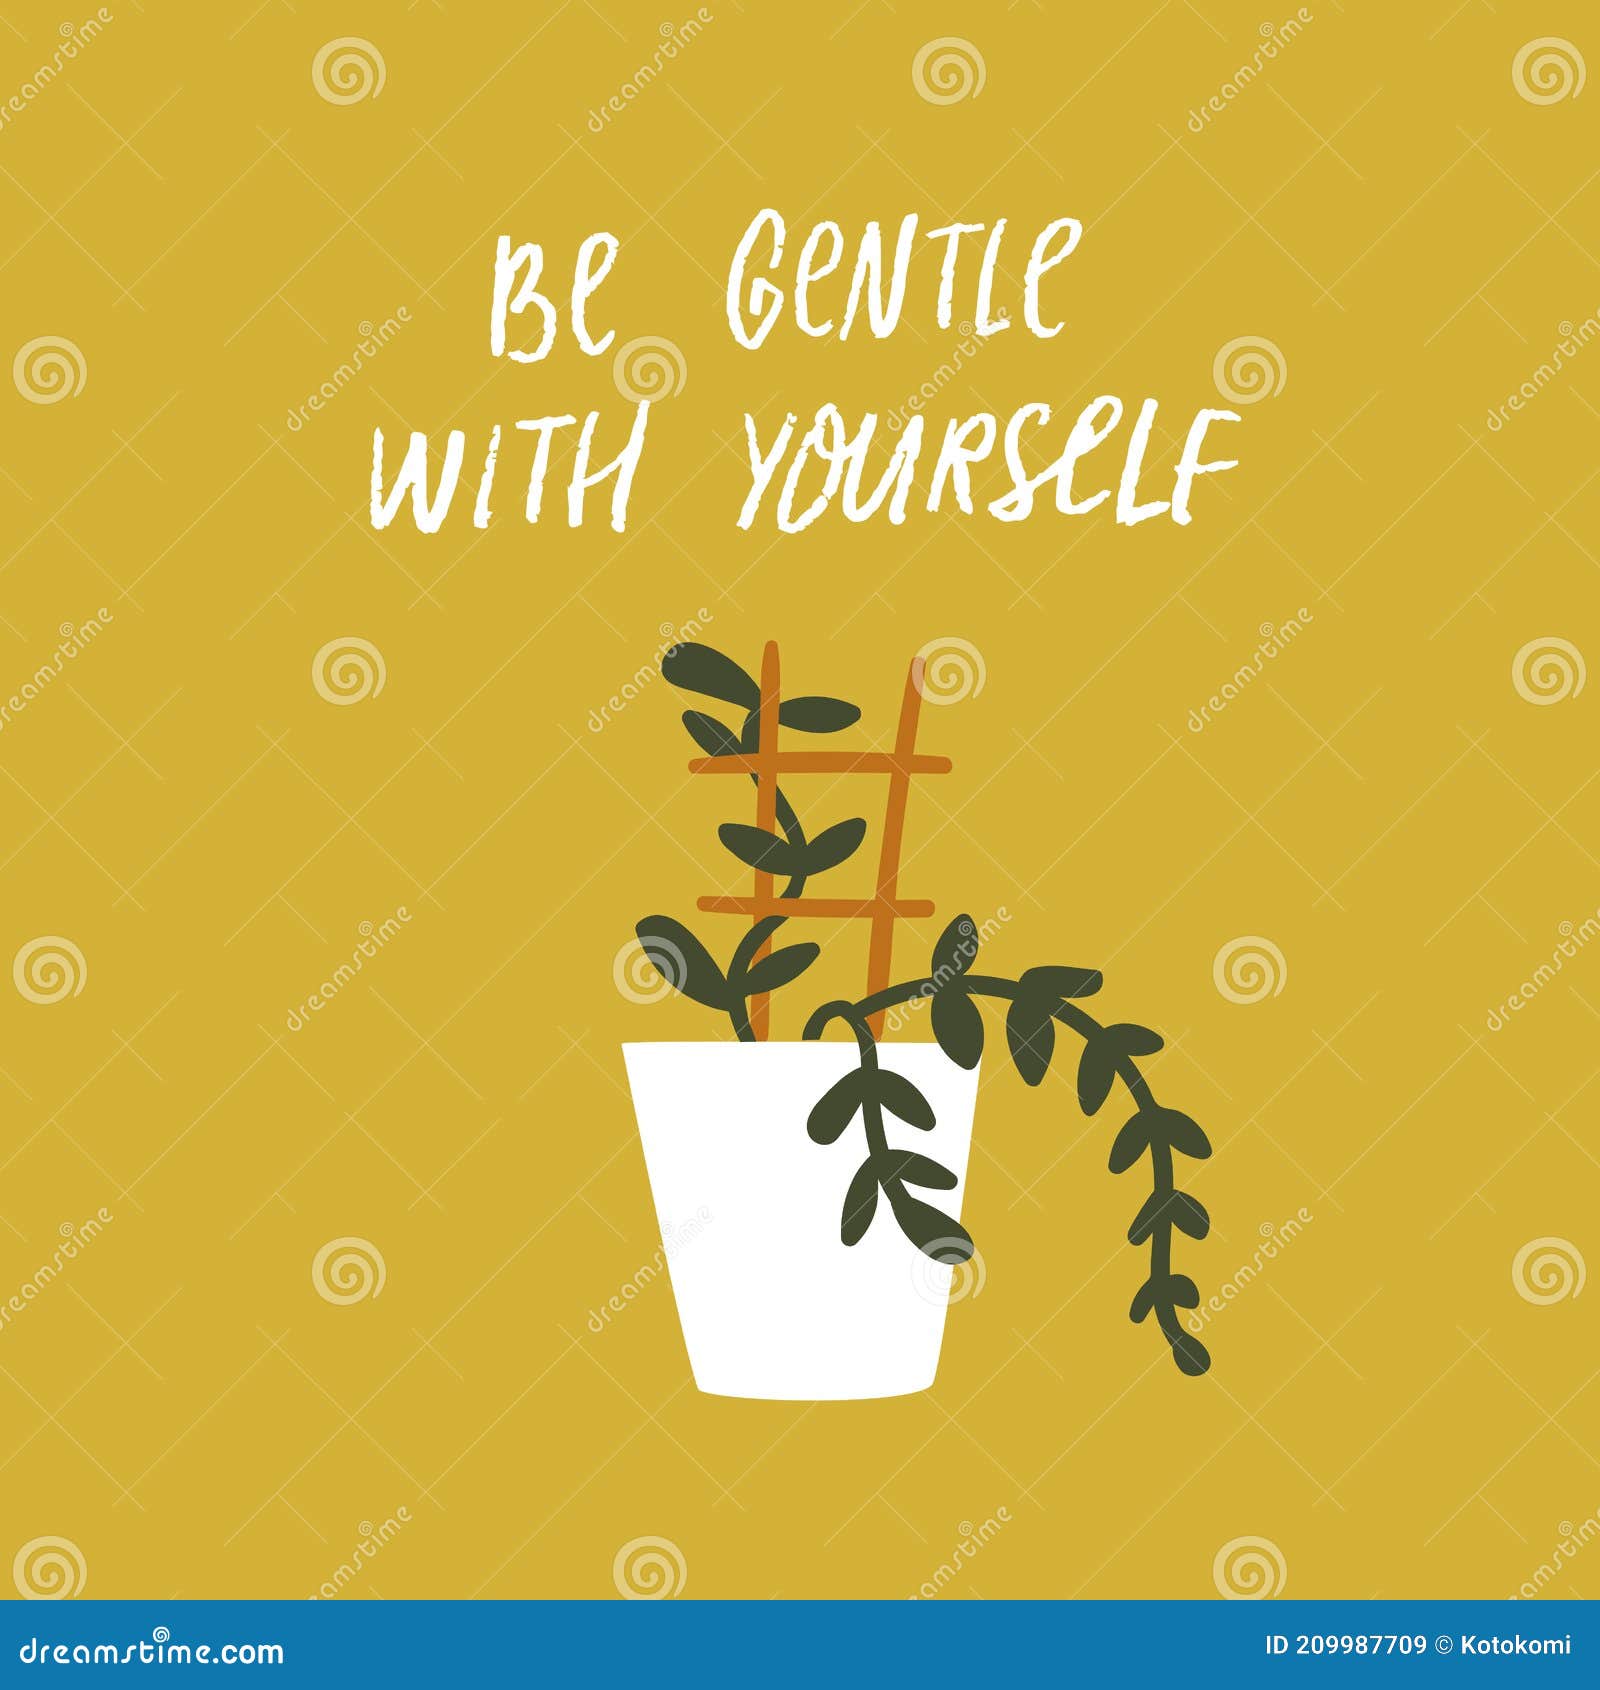 be gentle with yourself. inspirational quote about mental health and selfcare. potted home plant with support